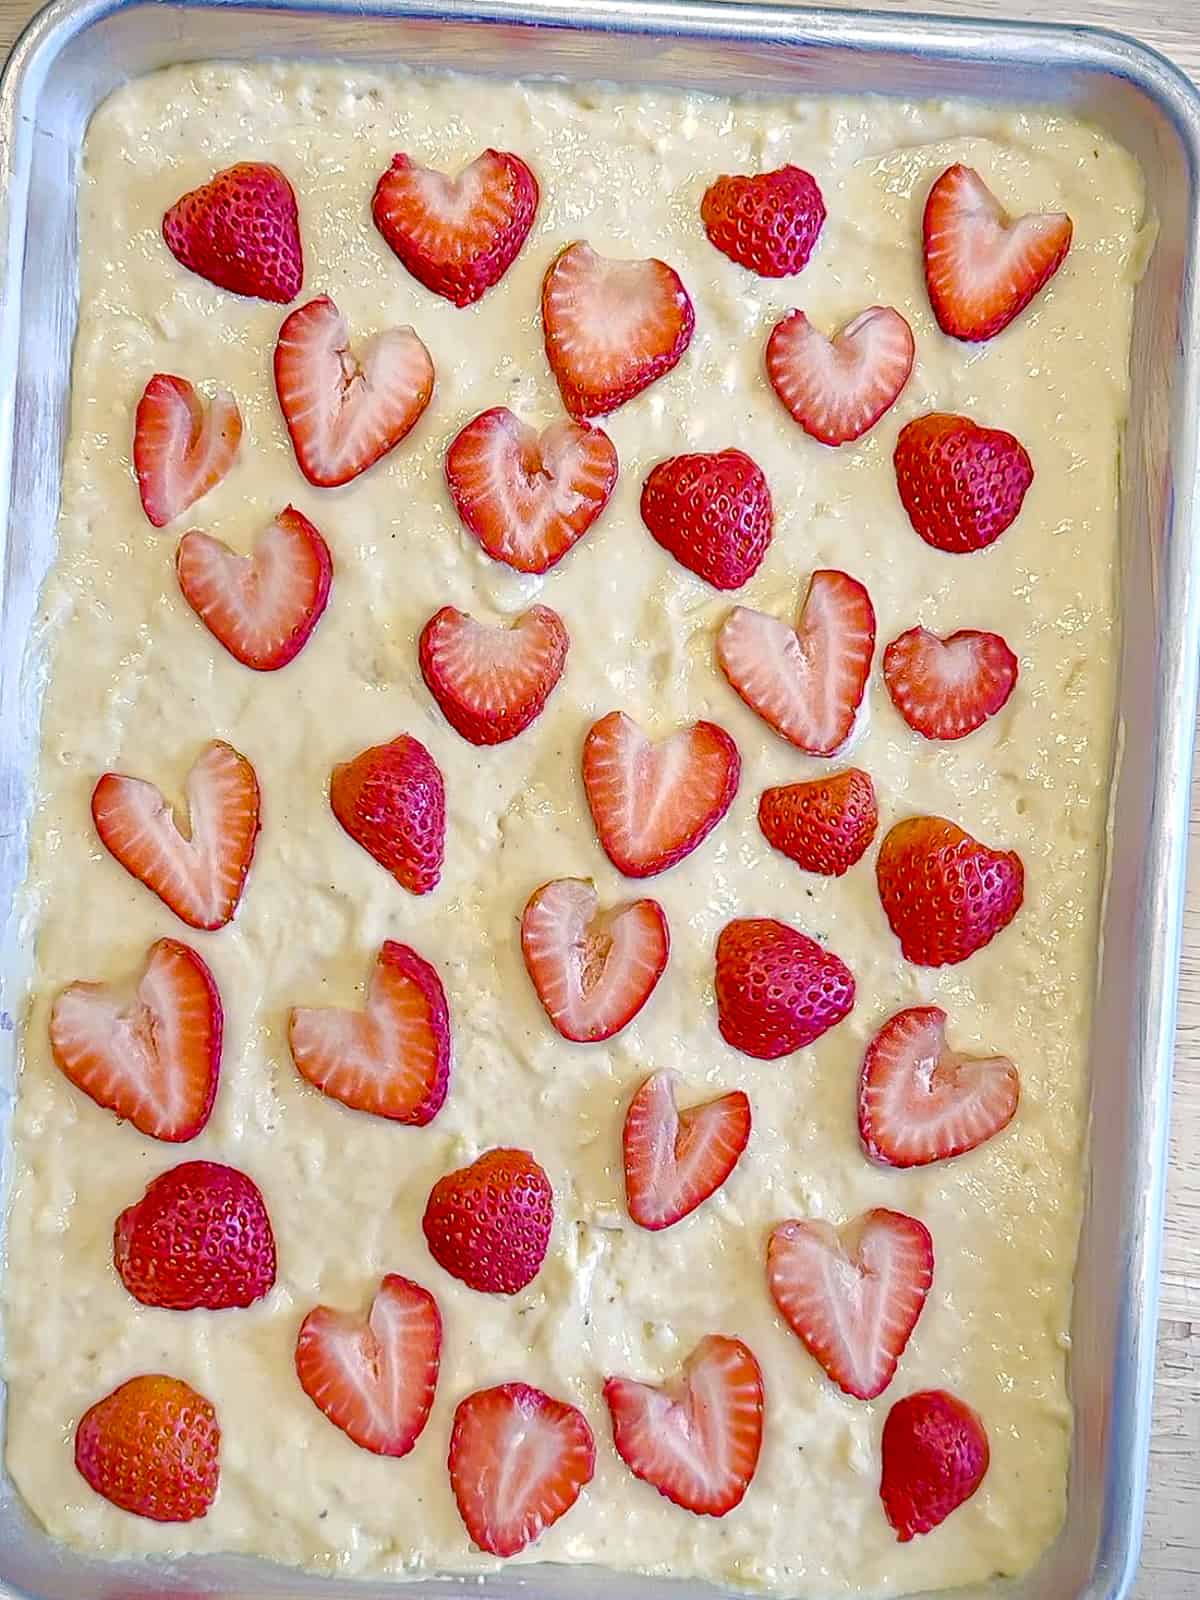 Placing strawberries on top of unbaked strawberry sheet pan pancakes.